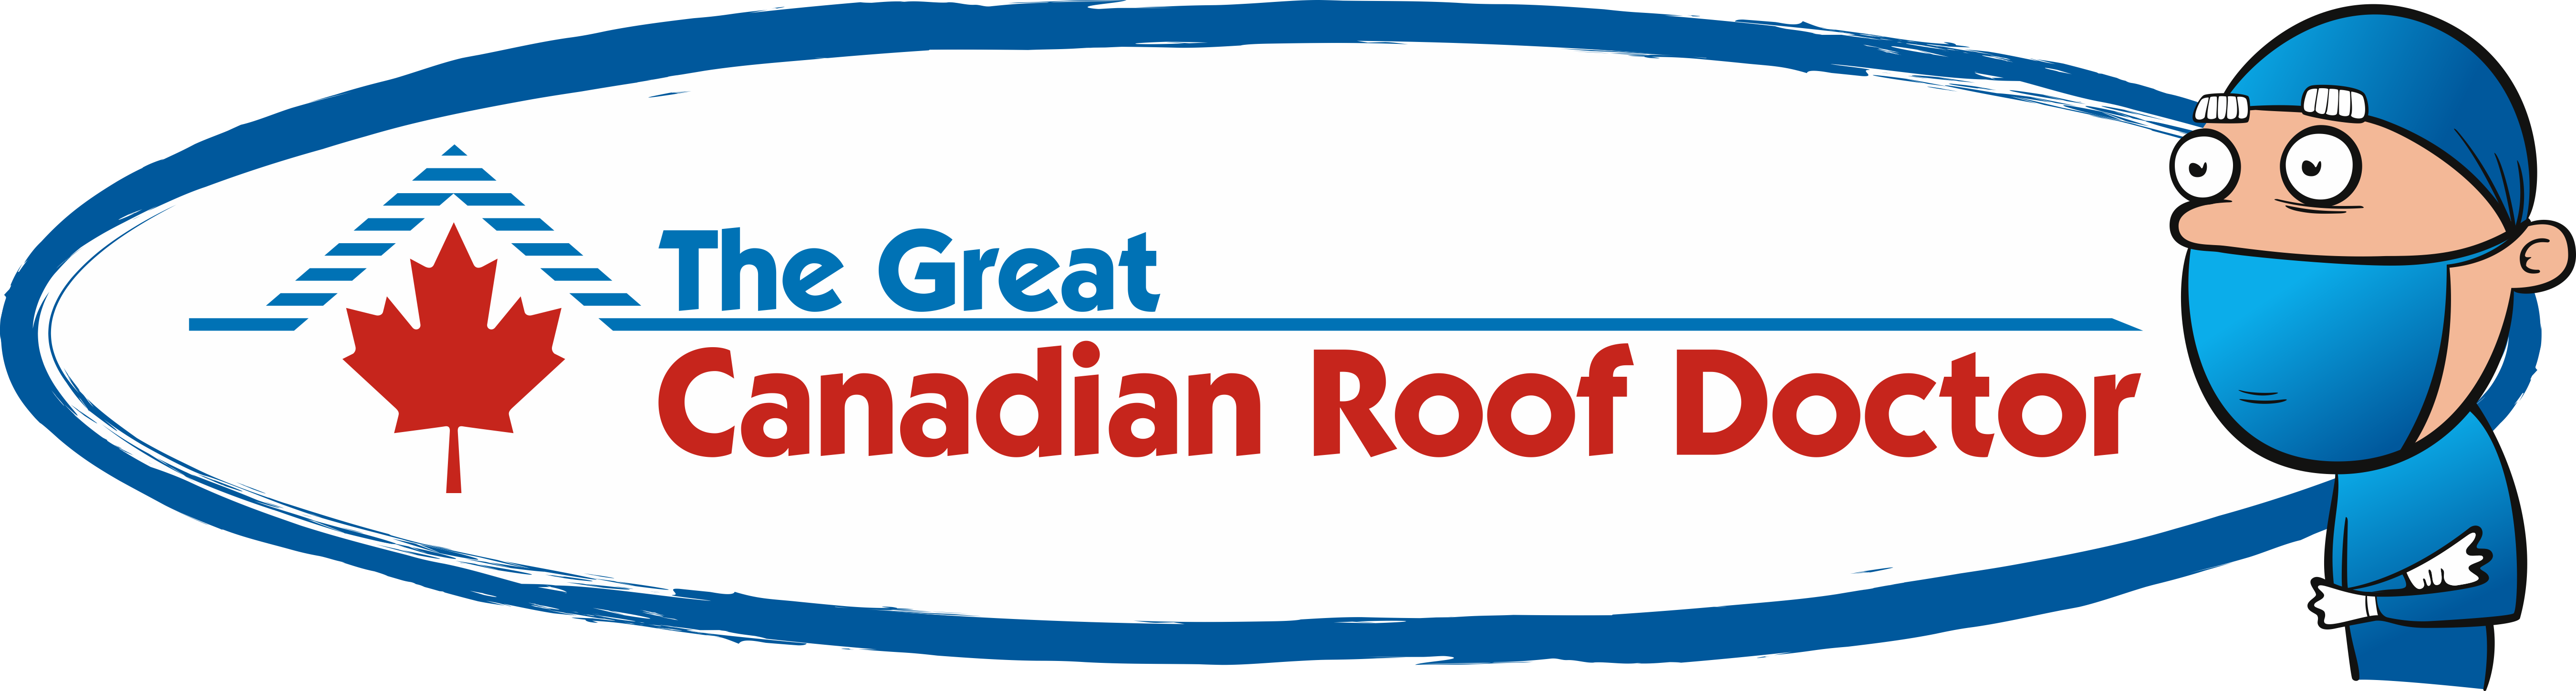 Great Canadian Roof Doctor